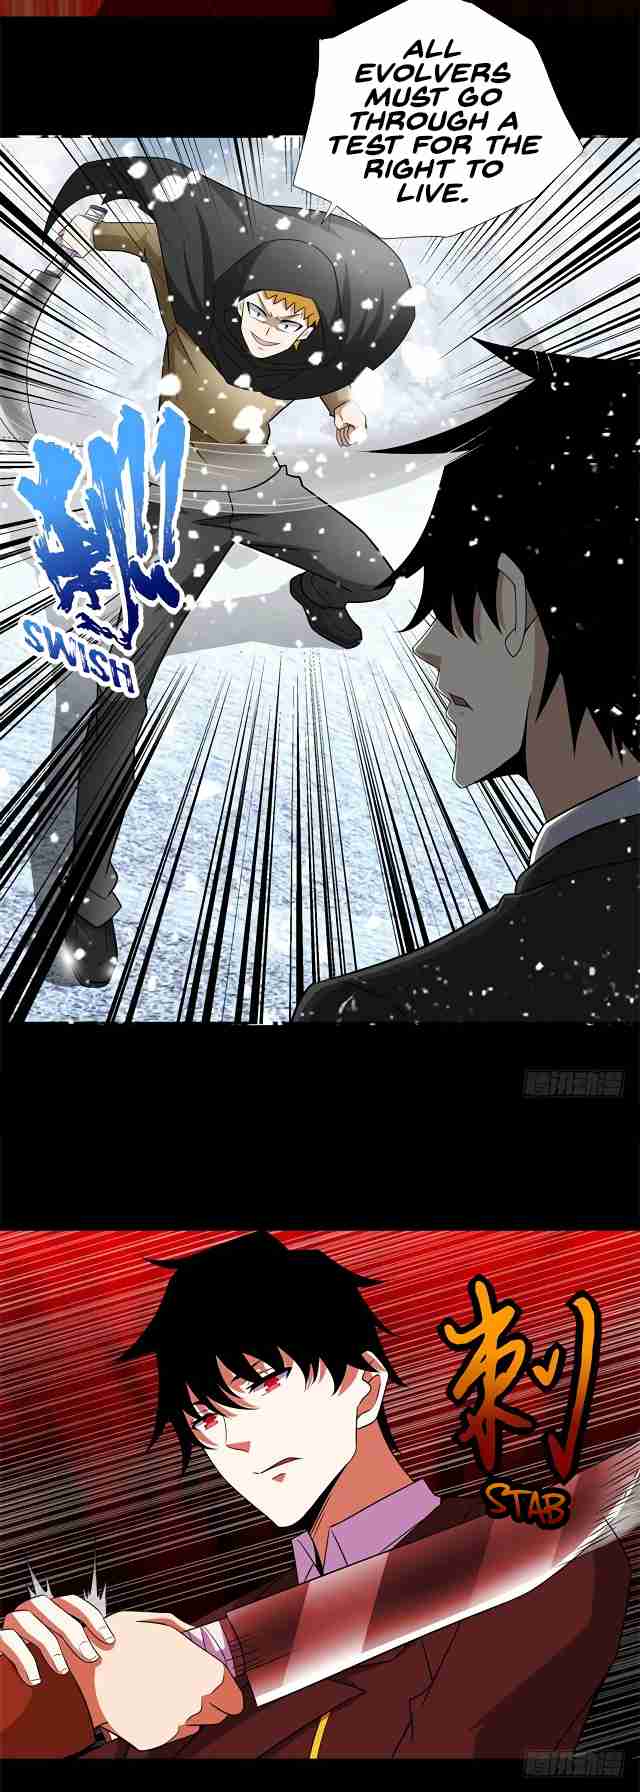 King of Apocalypse Ch. 186 Falling Snow Dimension